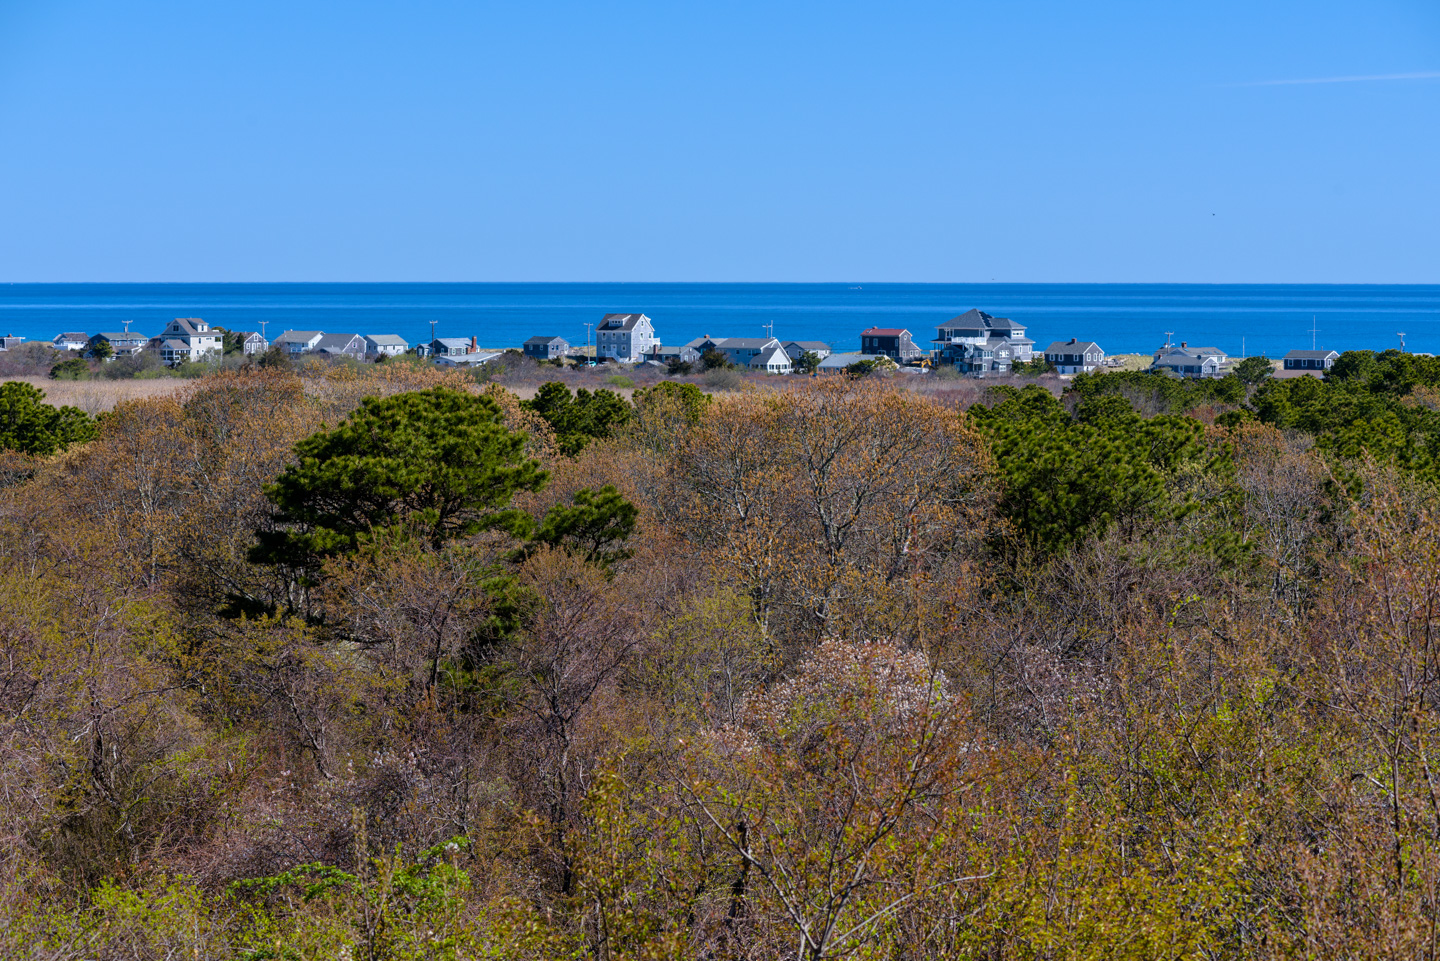 View from Sagamore Hill to Cape Cod Bay, with a row of houses near the water.